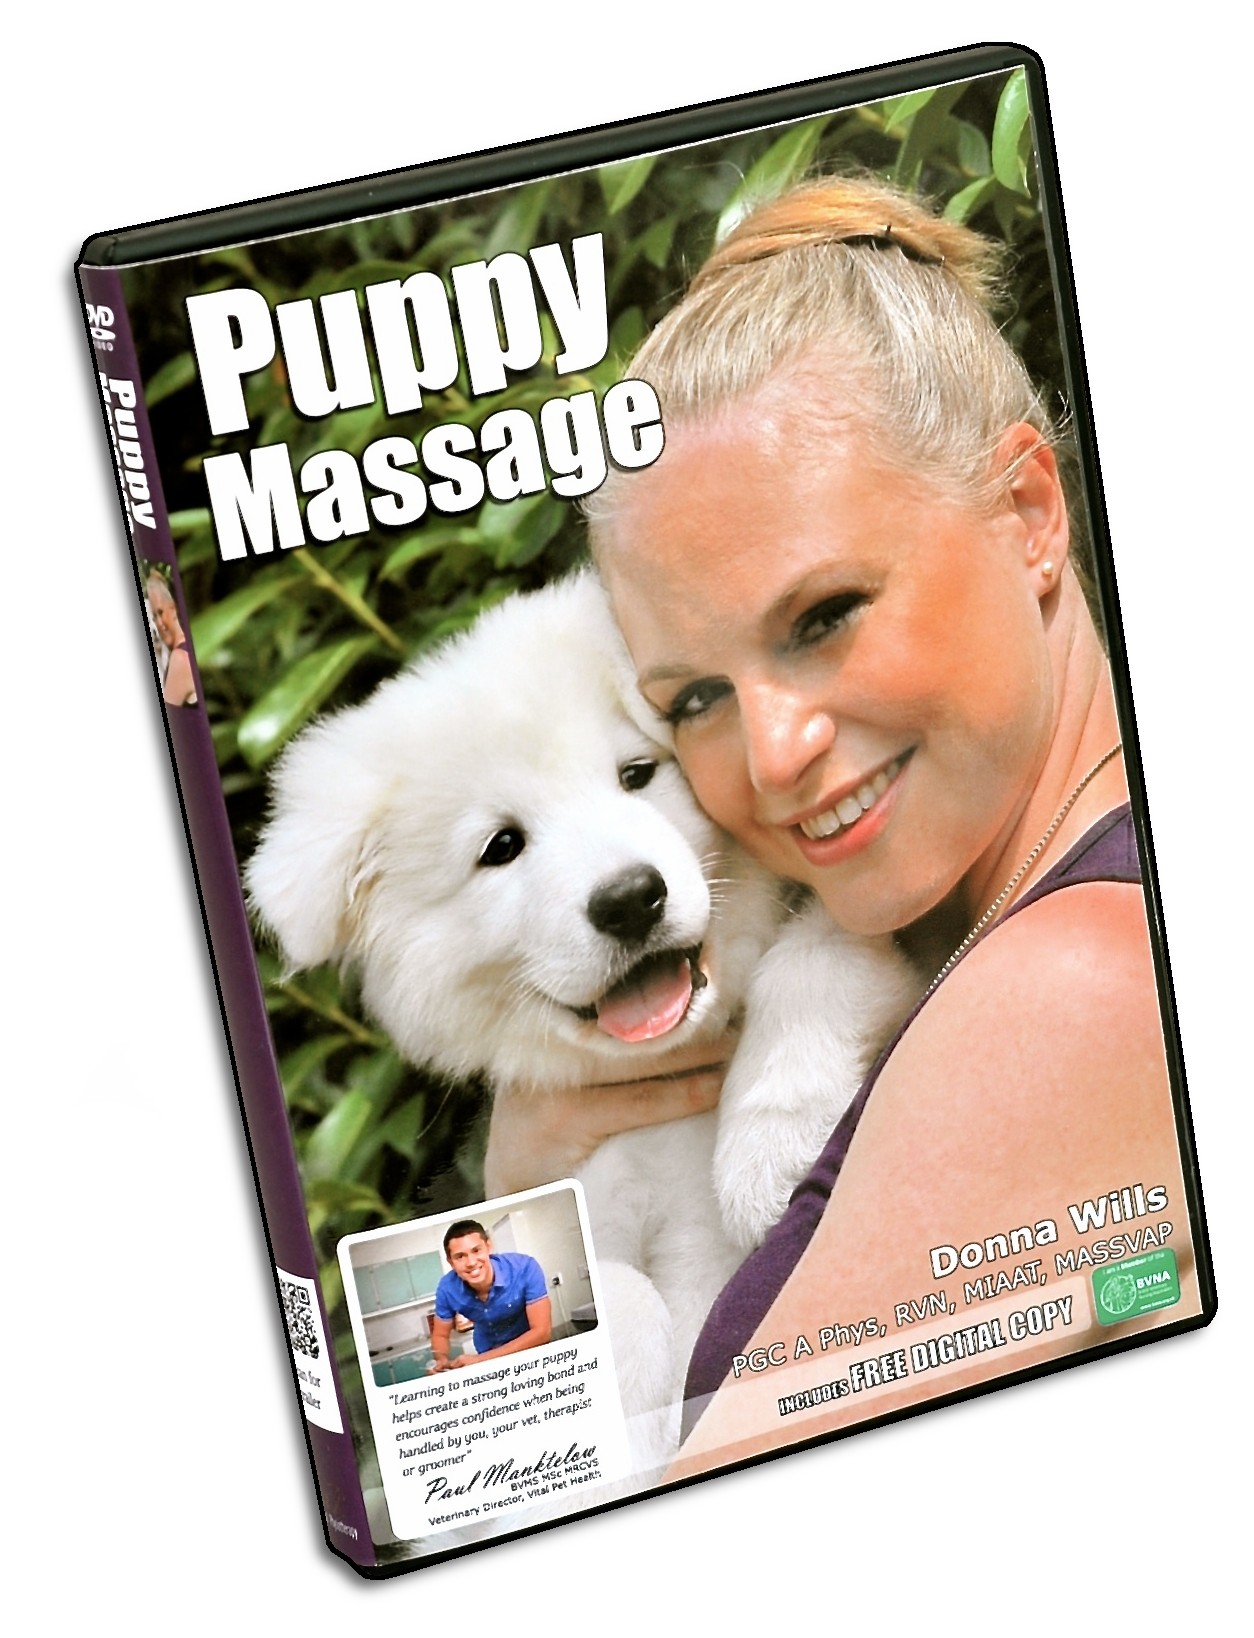 Puppy Massage DVD - Buy now with ease